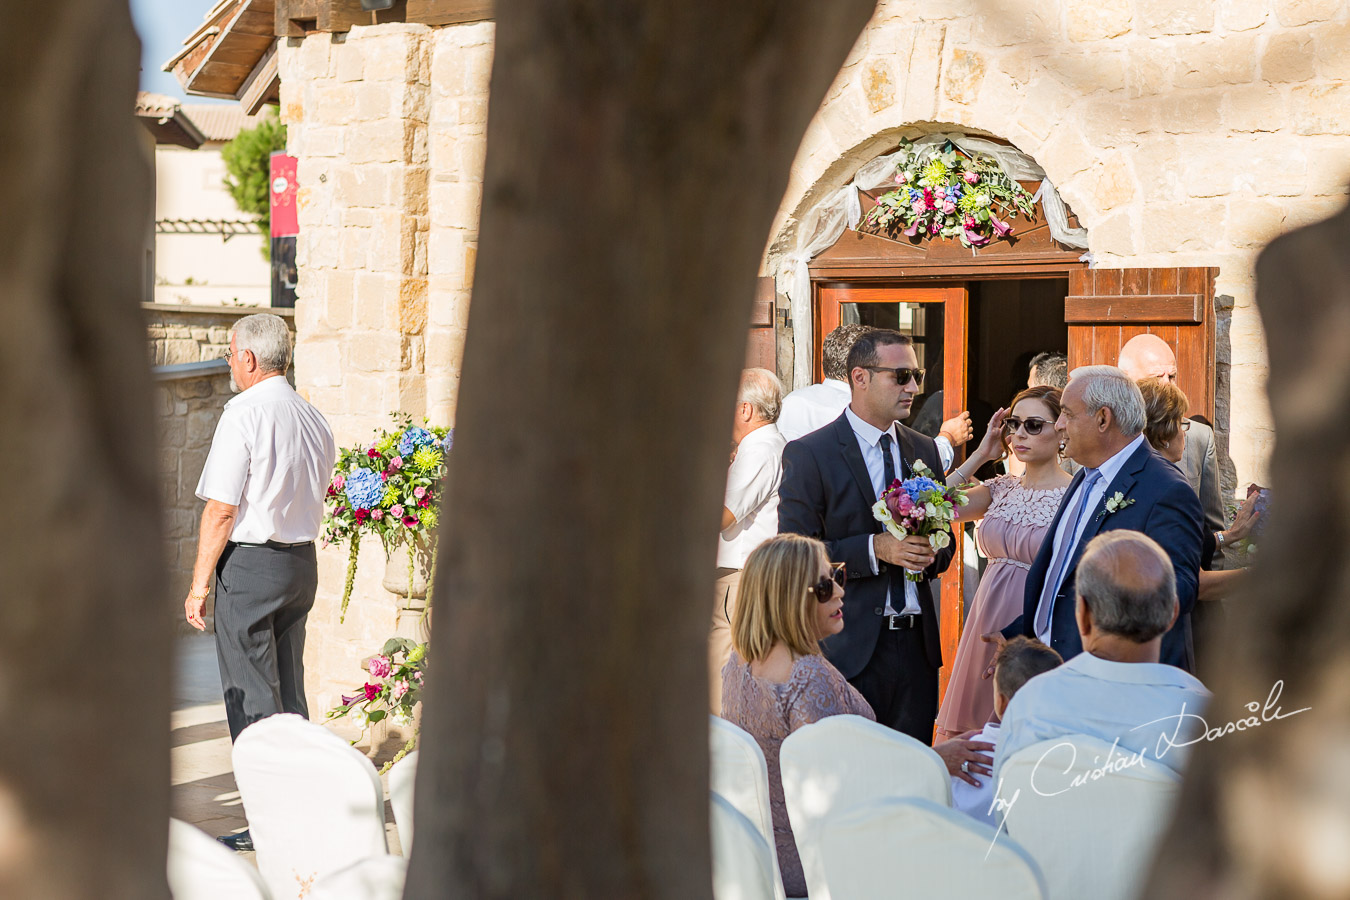 Wedding at Aphrodite Hills in Cyprus - 55